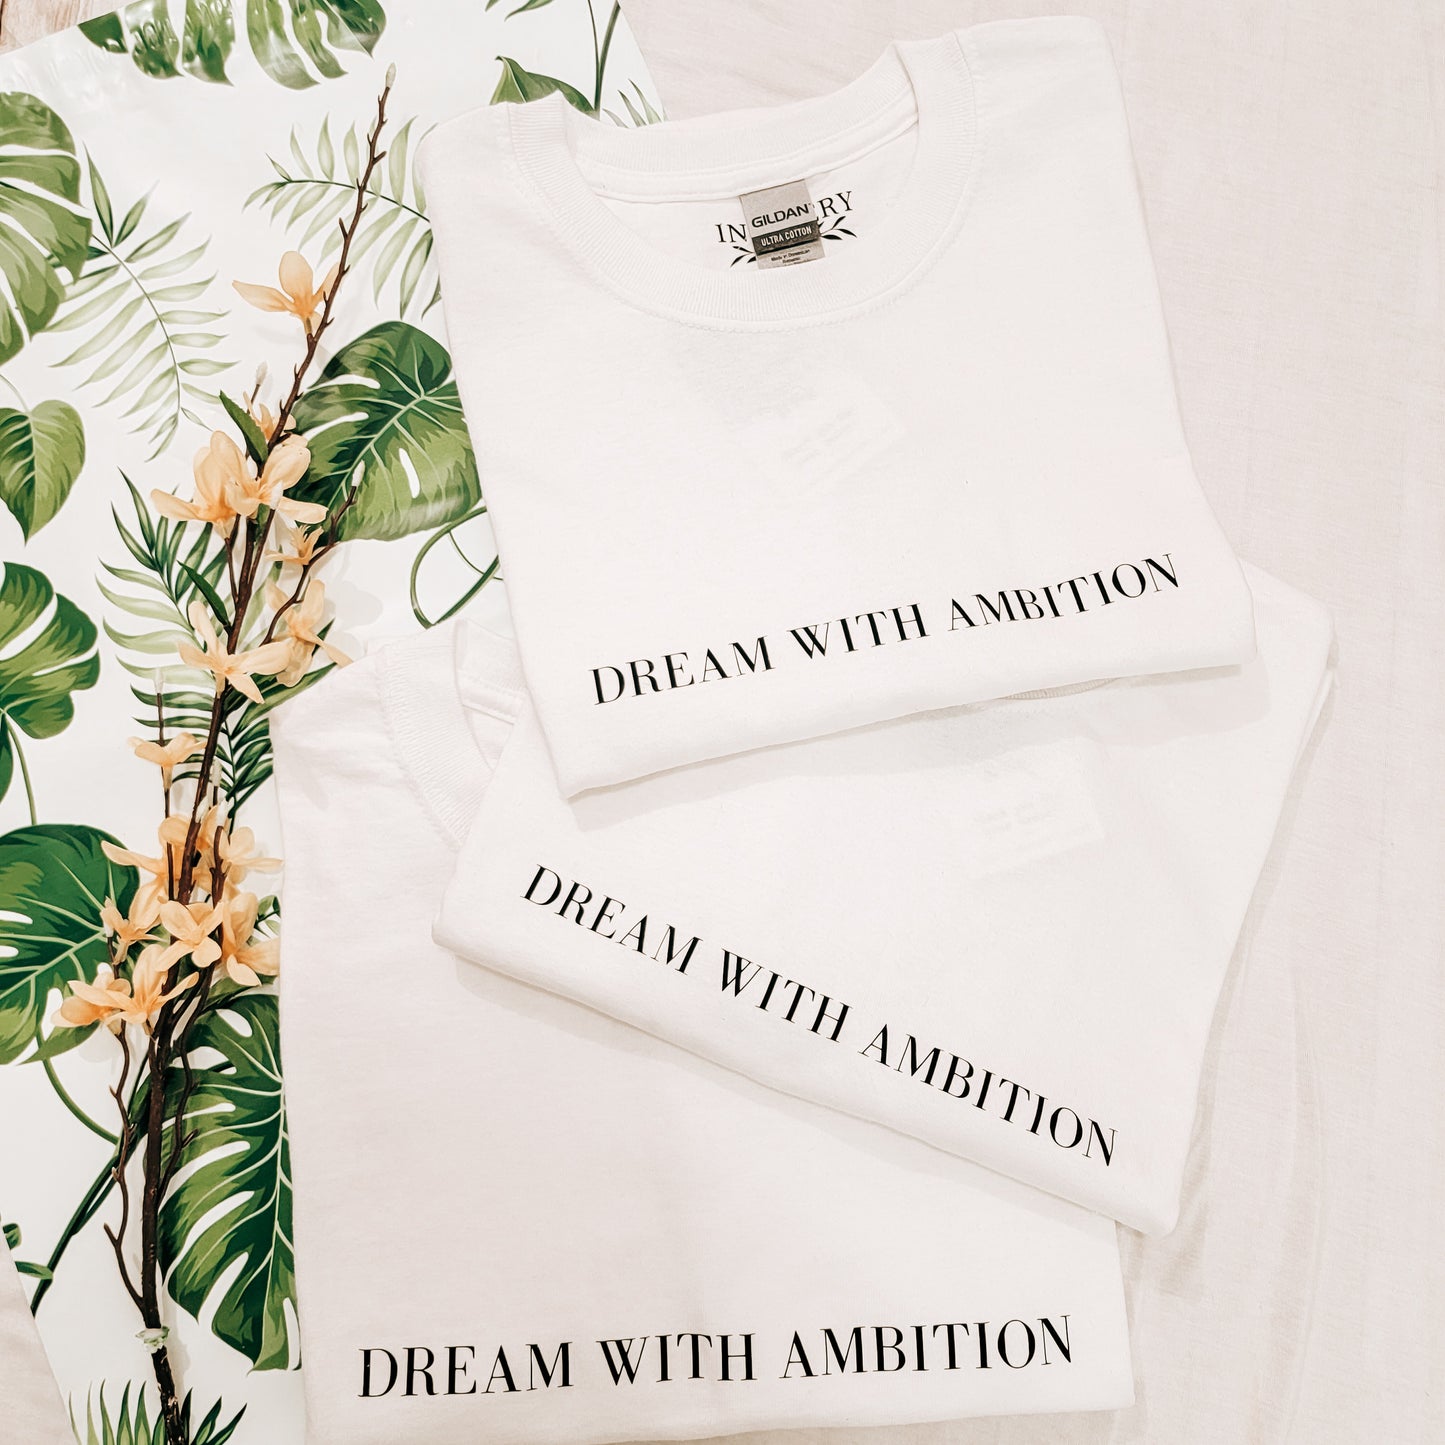 Dream with Ambition - T-Shirt